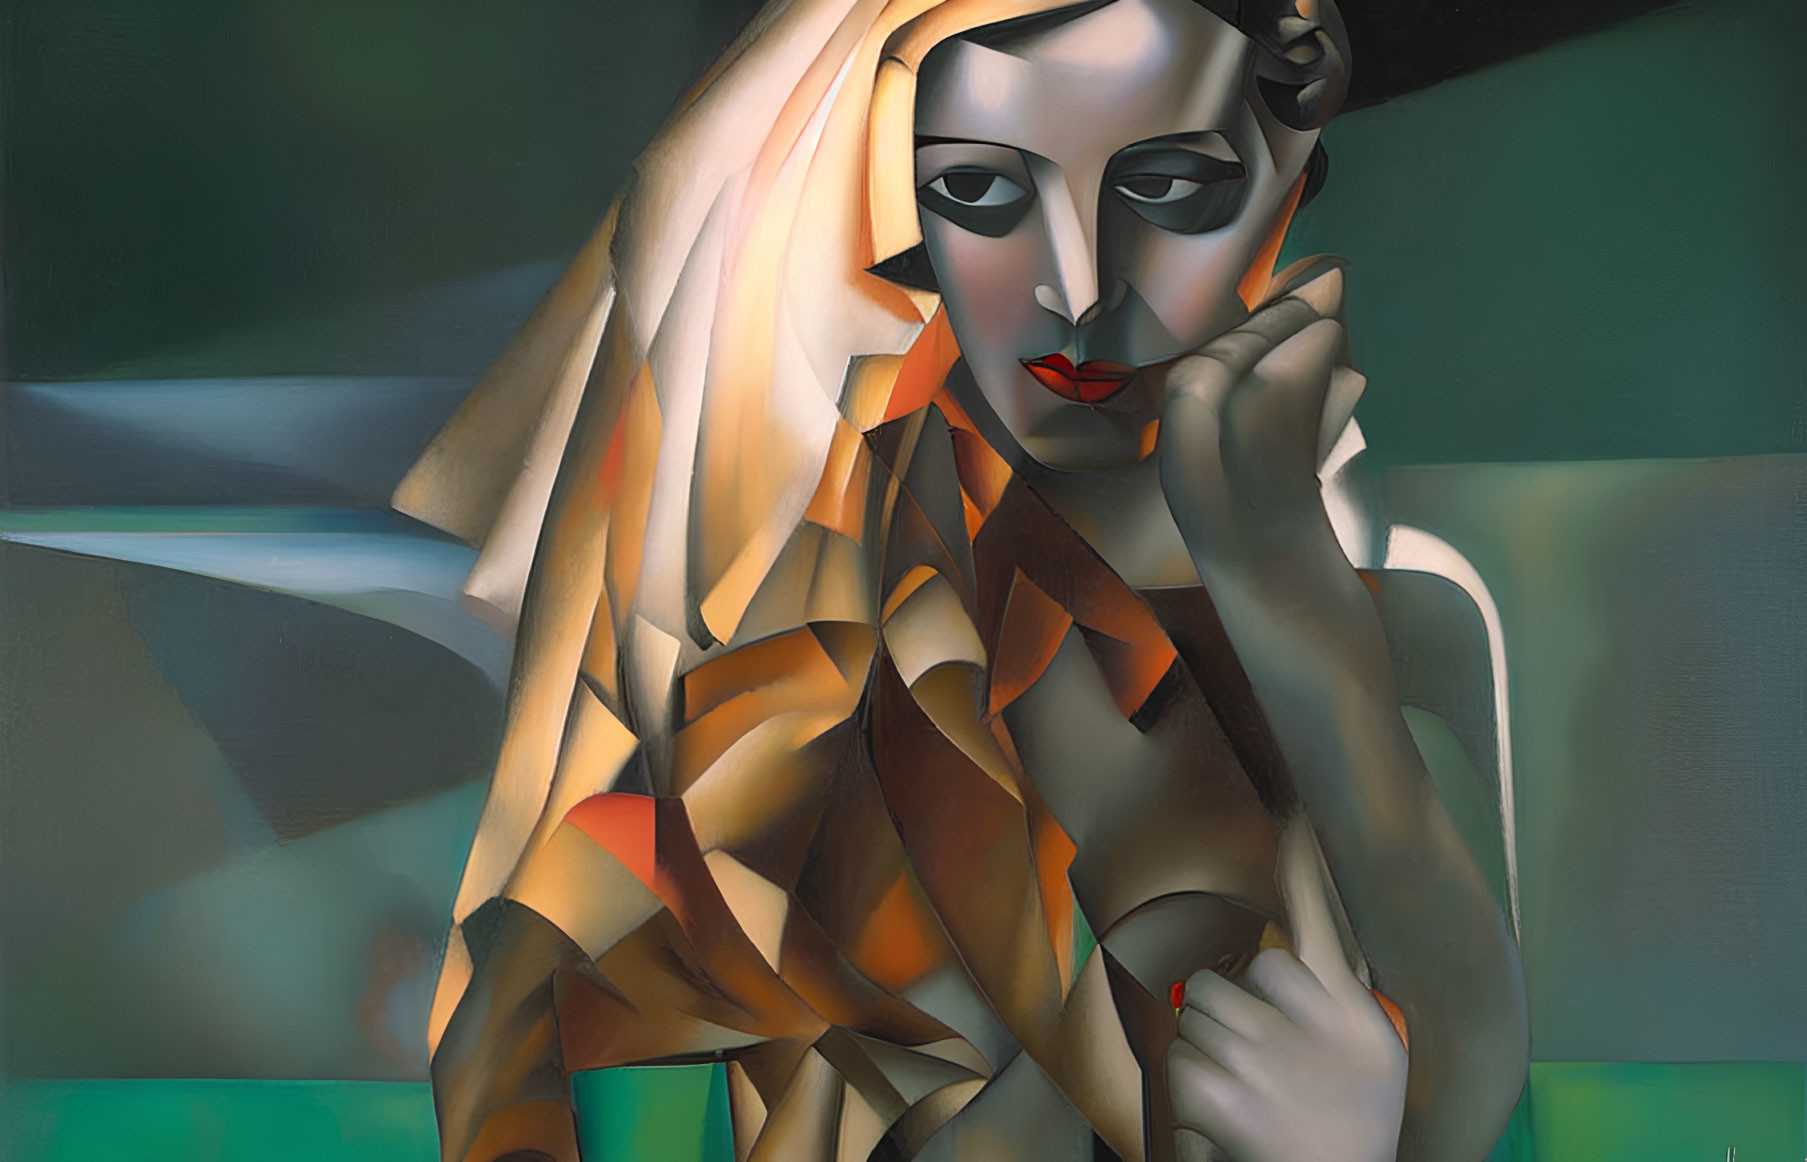 Cubist-style painting of reflective woman with fragmented features